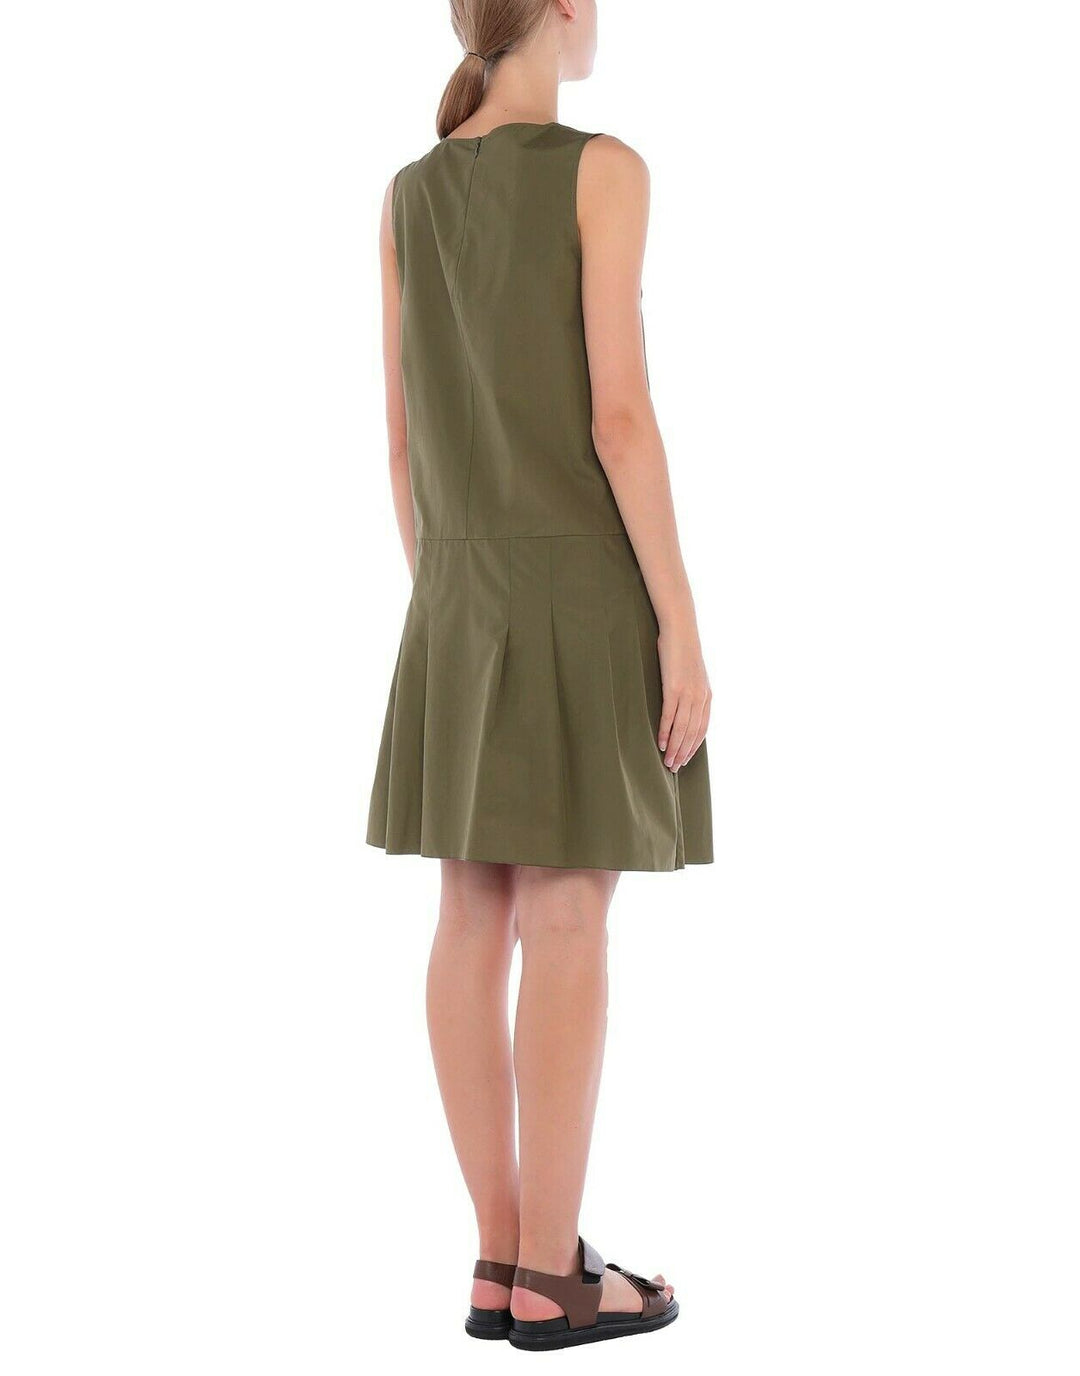 Marni Green Short Dress Veronique Luxury Collections